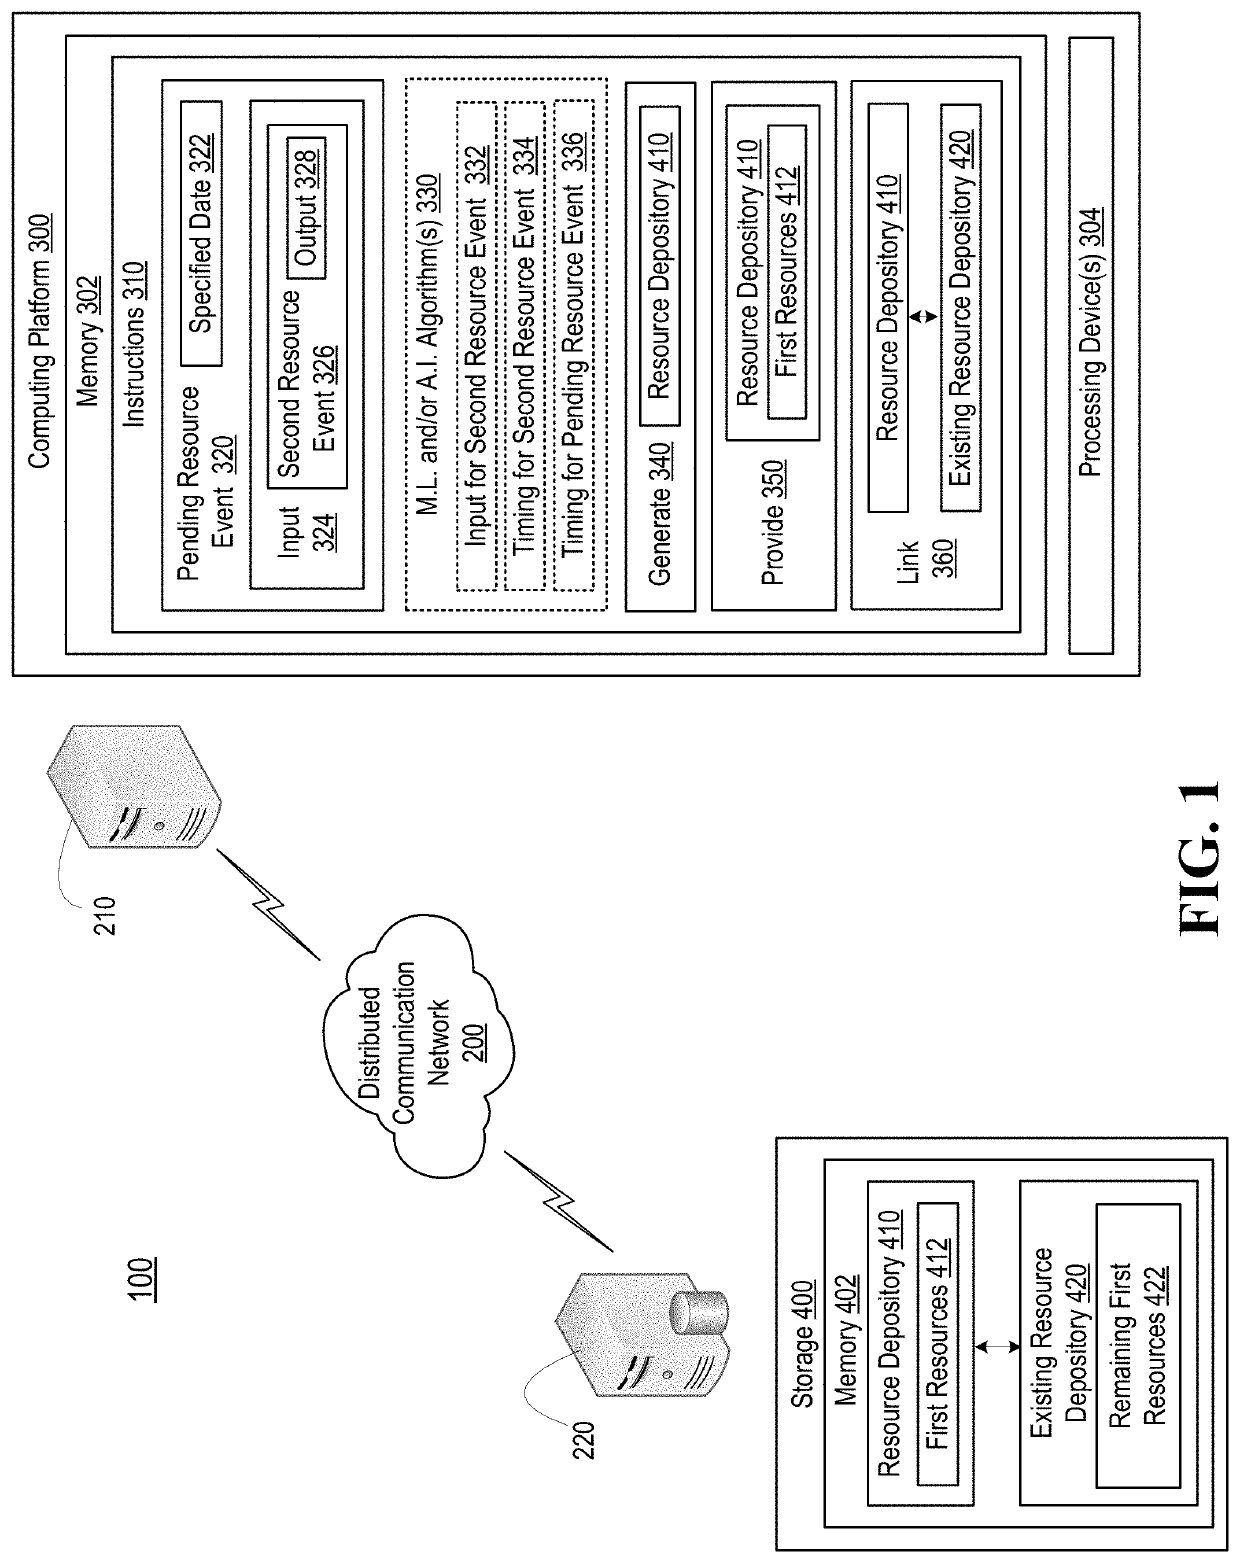 Systems for providing real-time resource distribution to a resource event having standard delayed resource availability